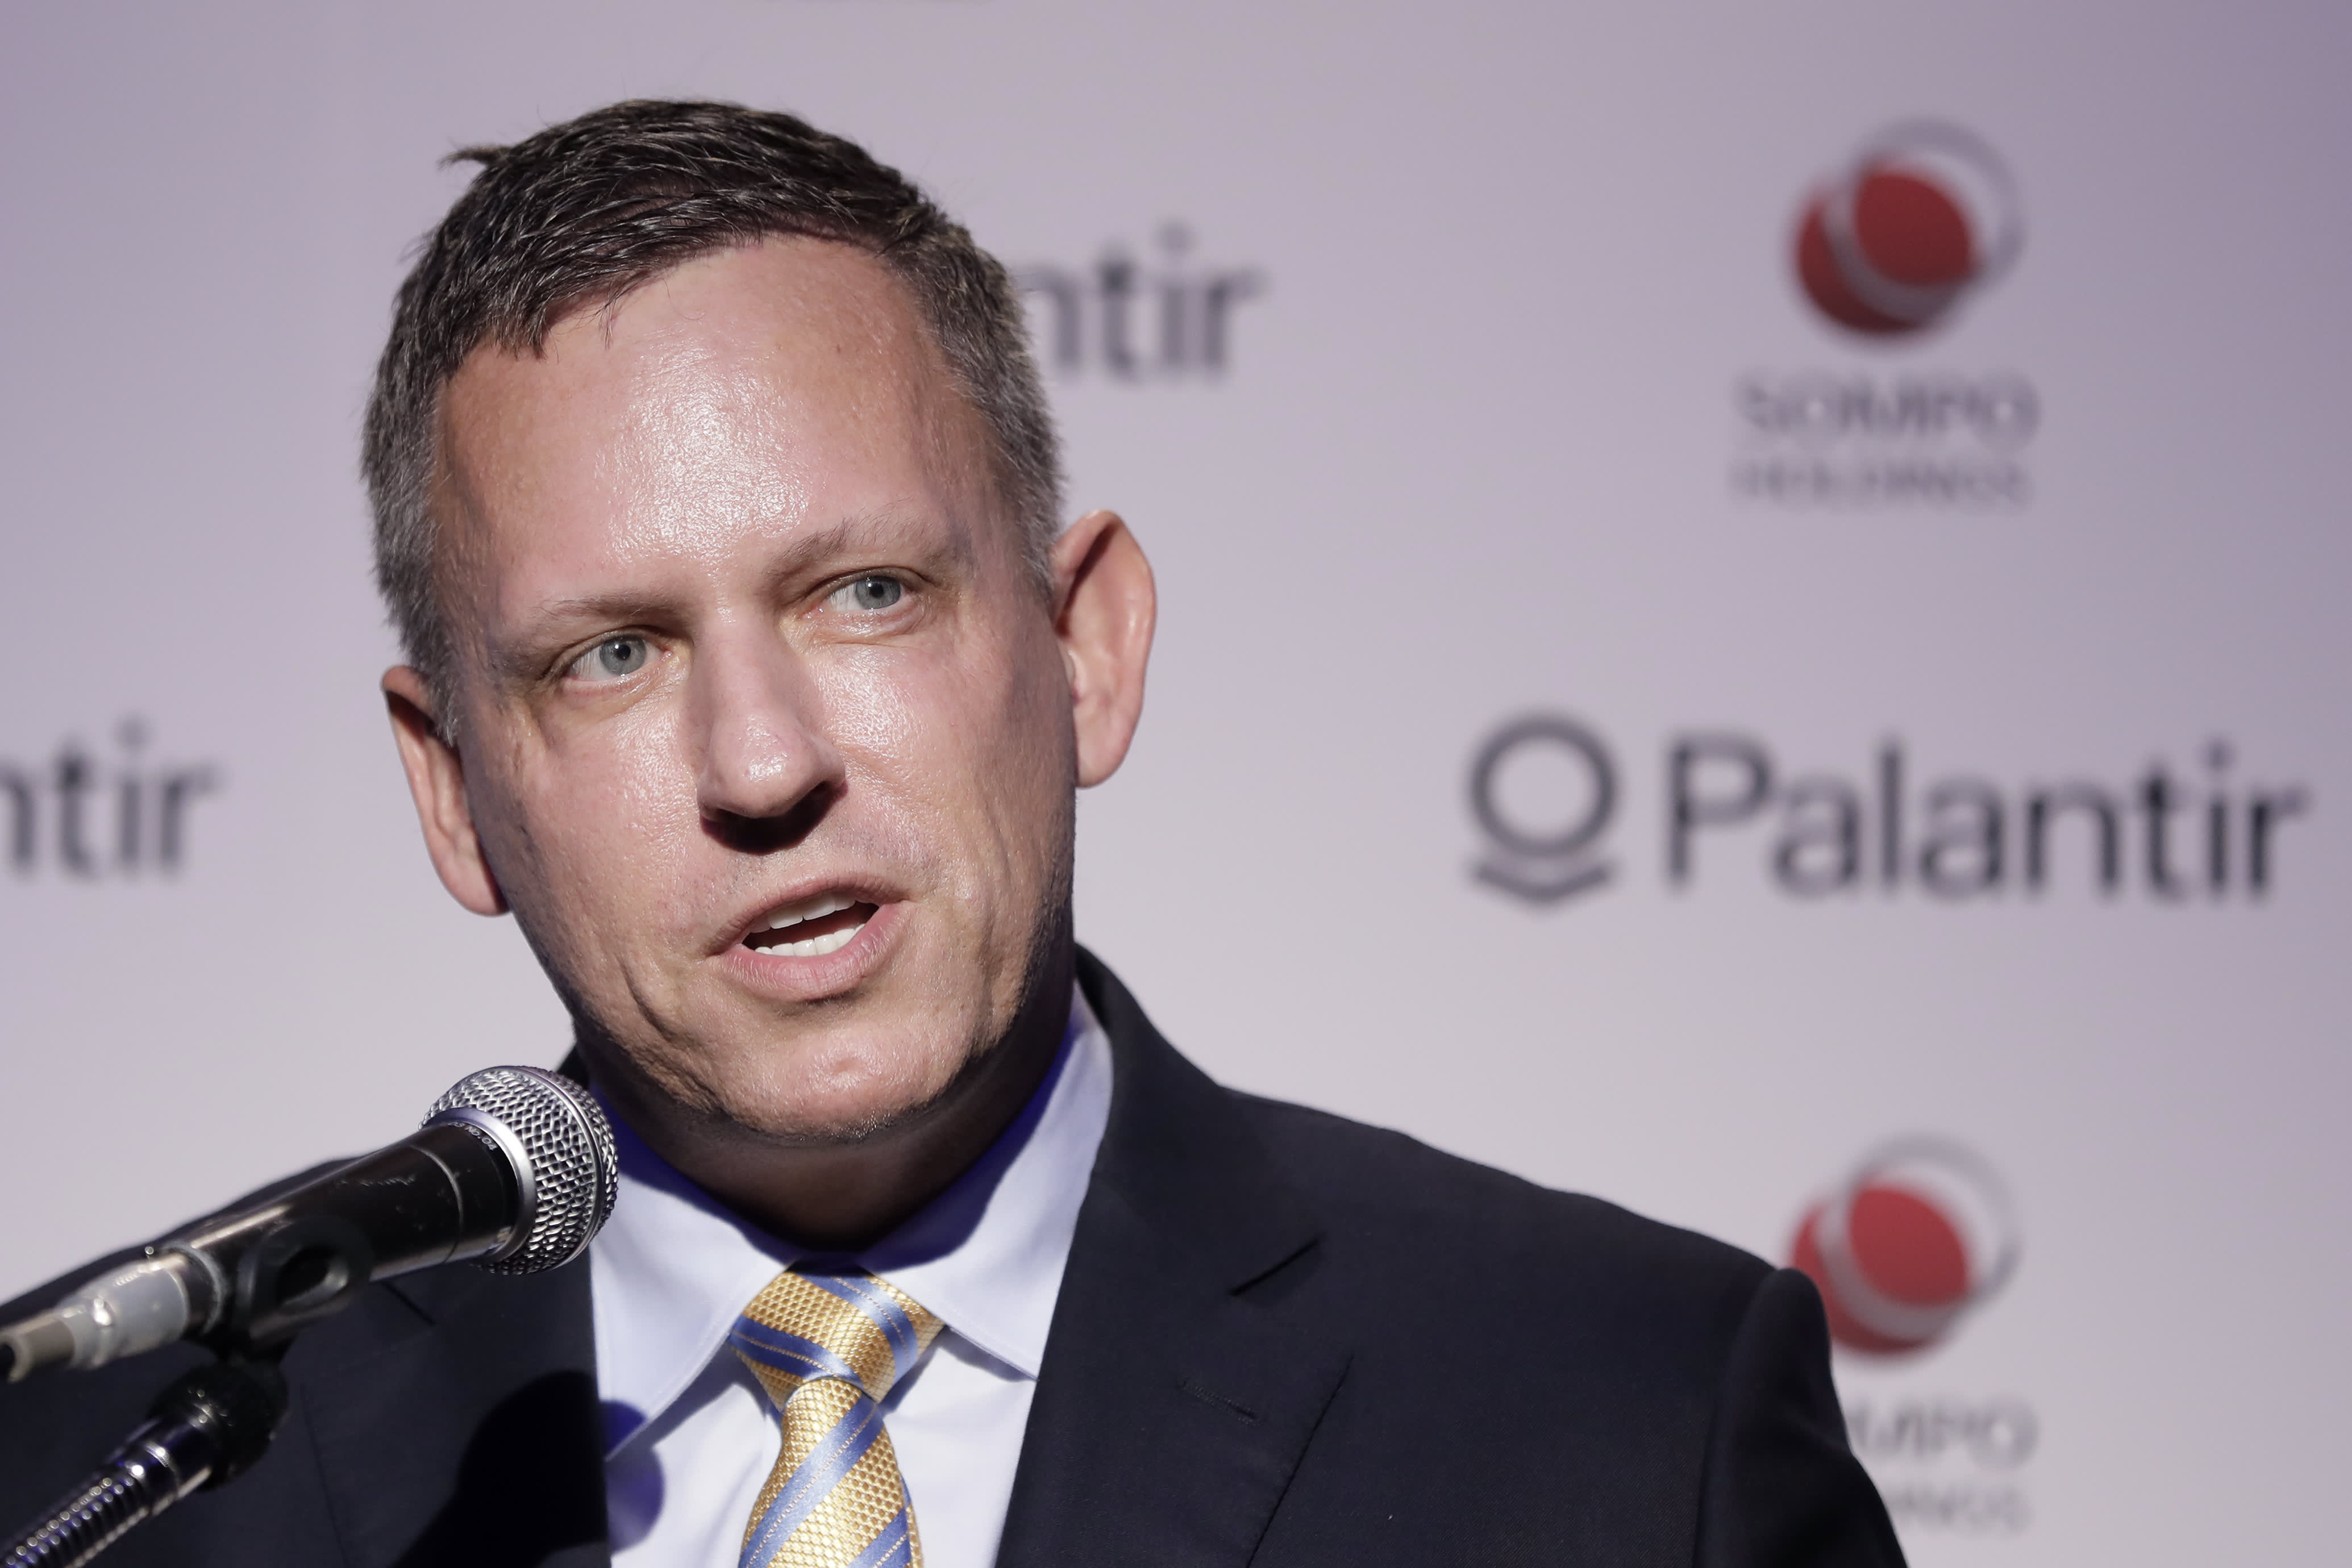 Peter Thiel criticizes Google and Apple for being too close to China